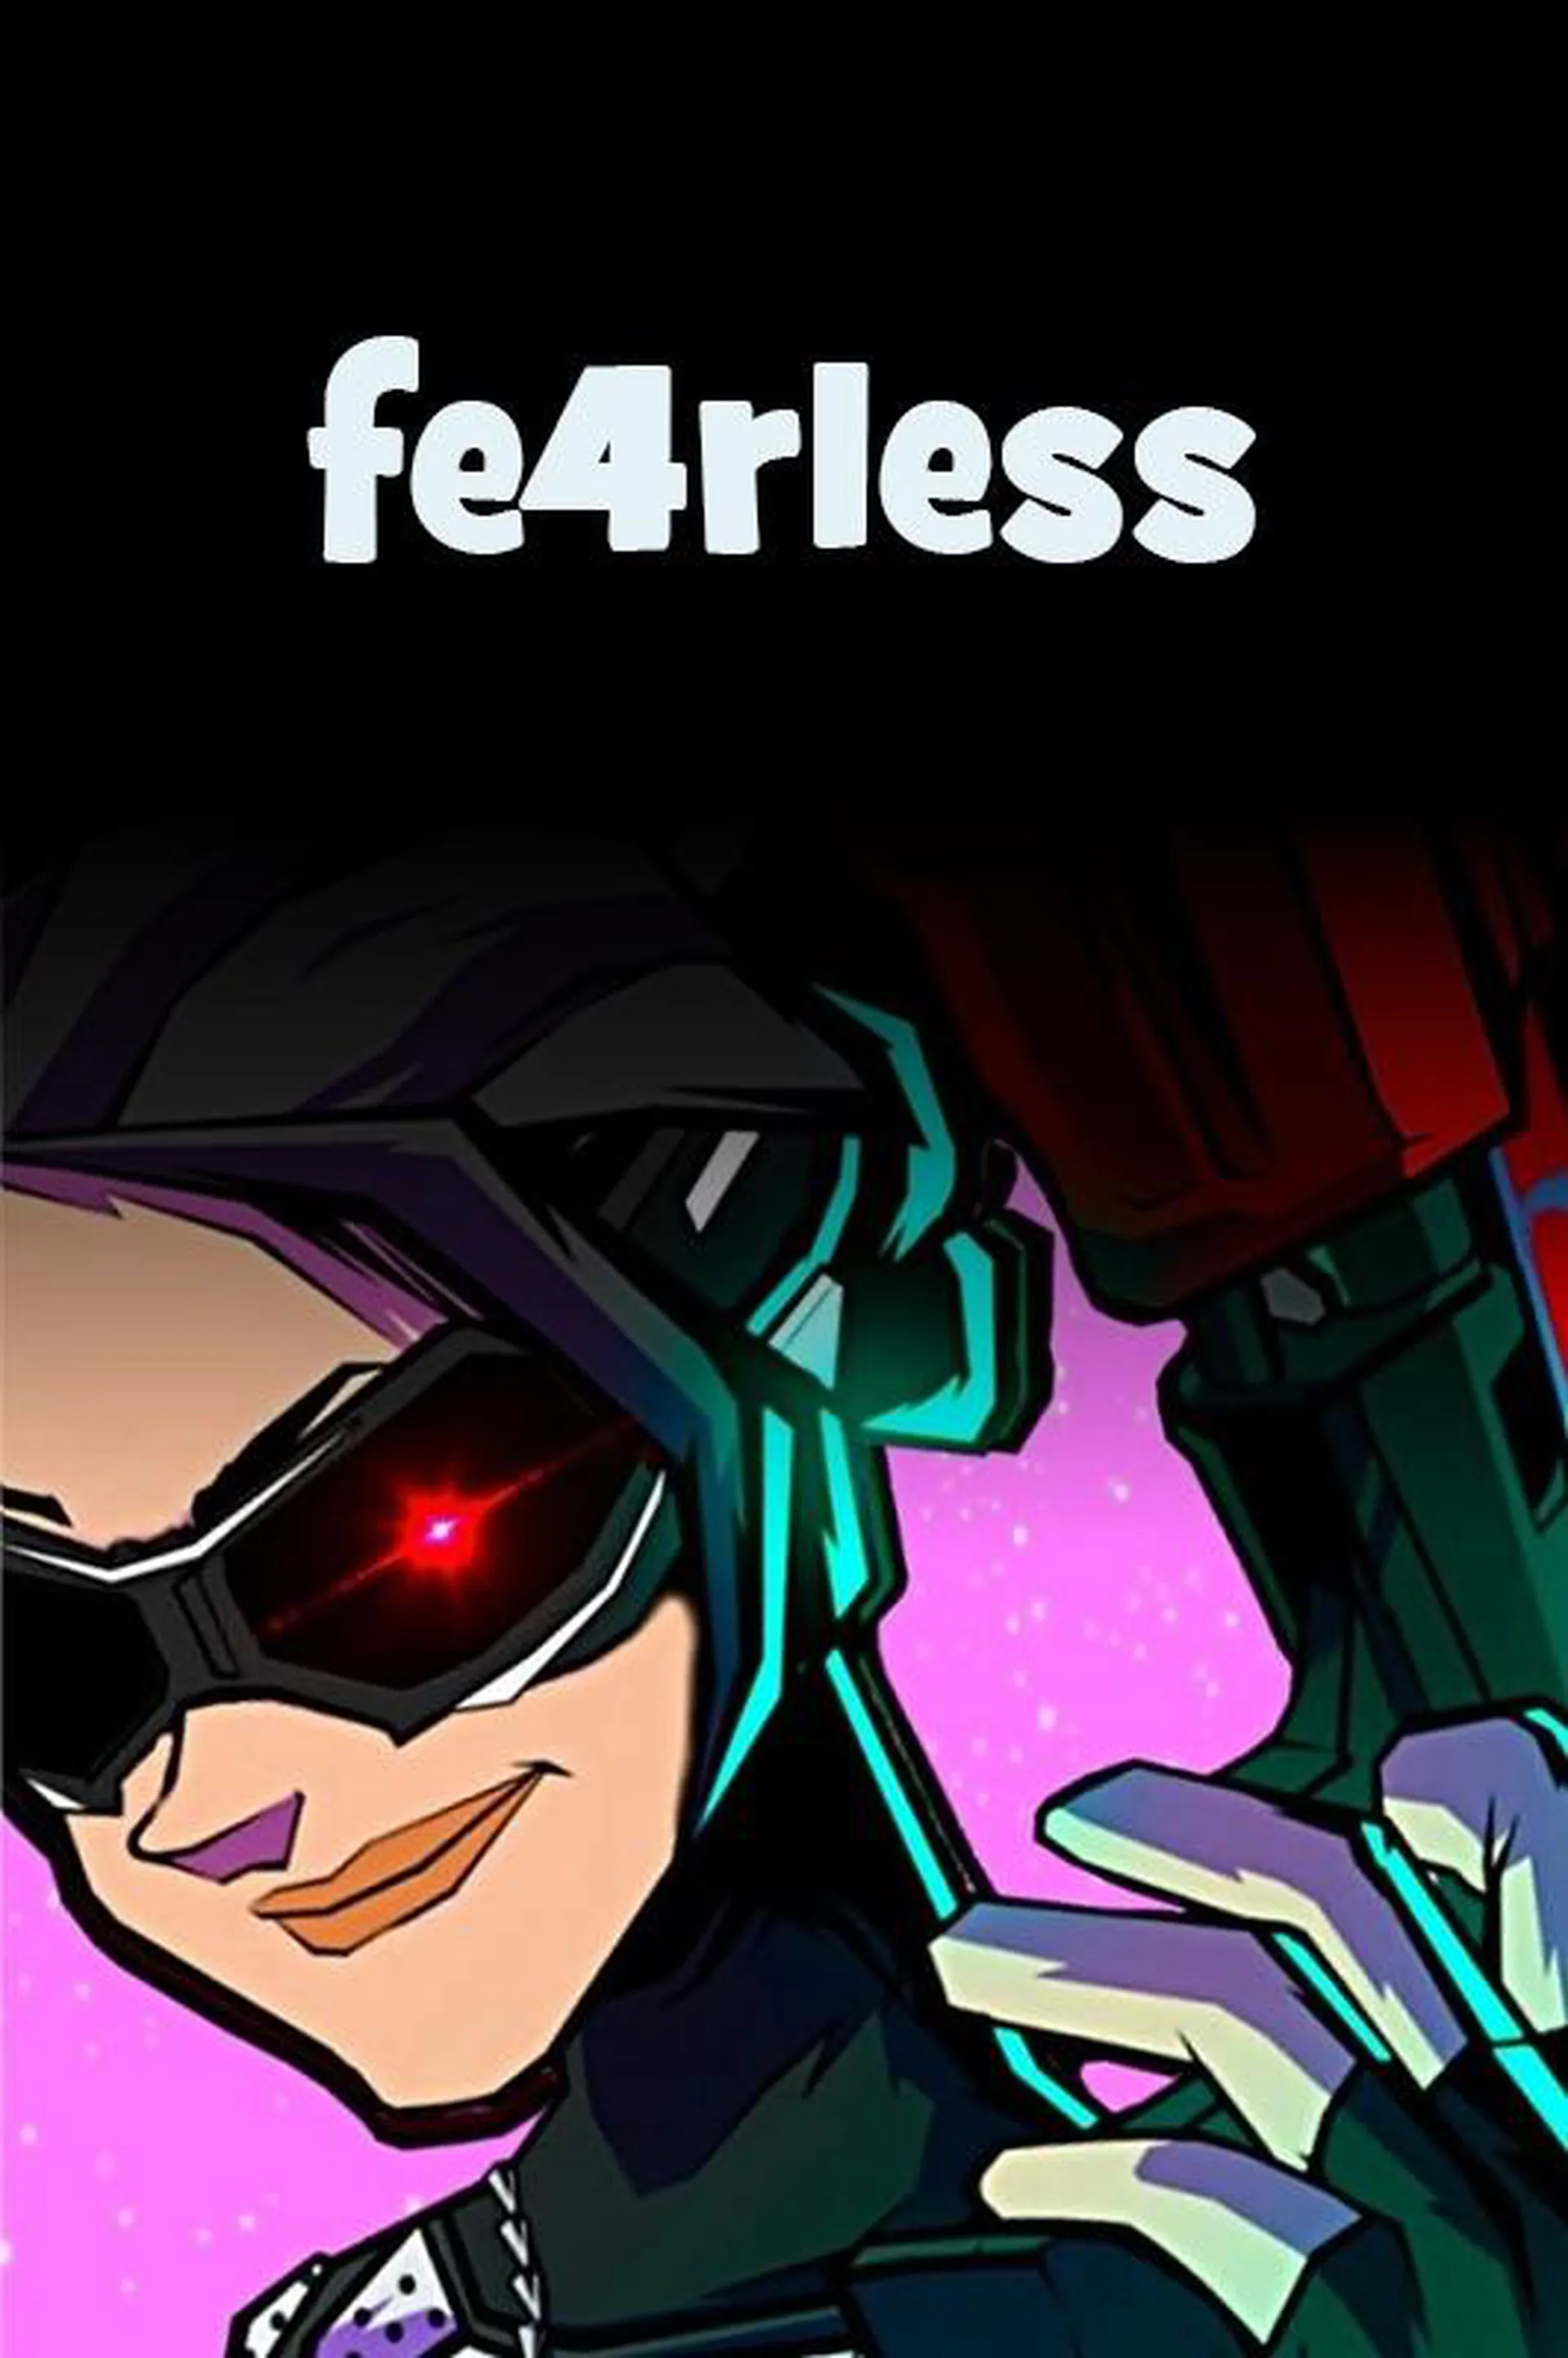 Watch Fe4RLess (2021) Online for Free | The Roku Channel | Roku